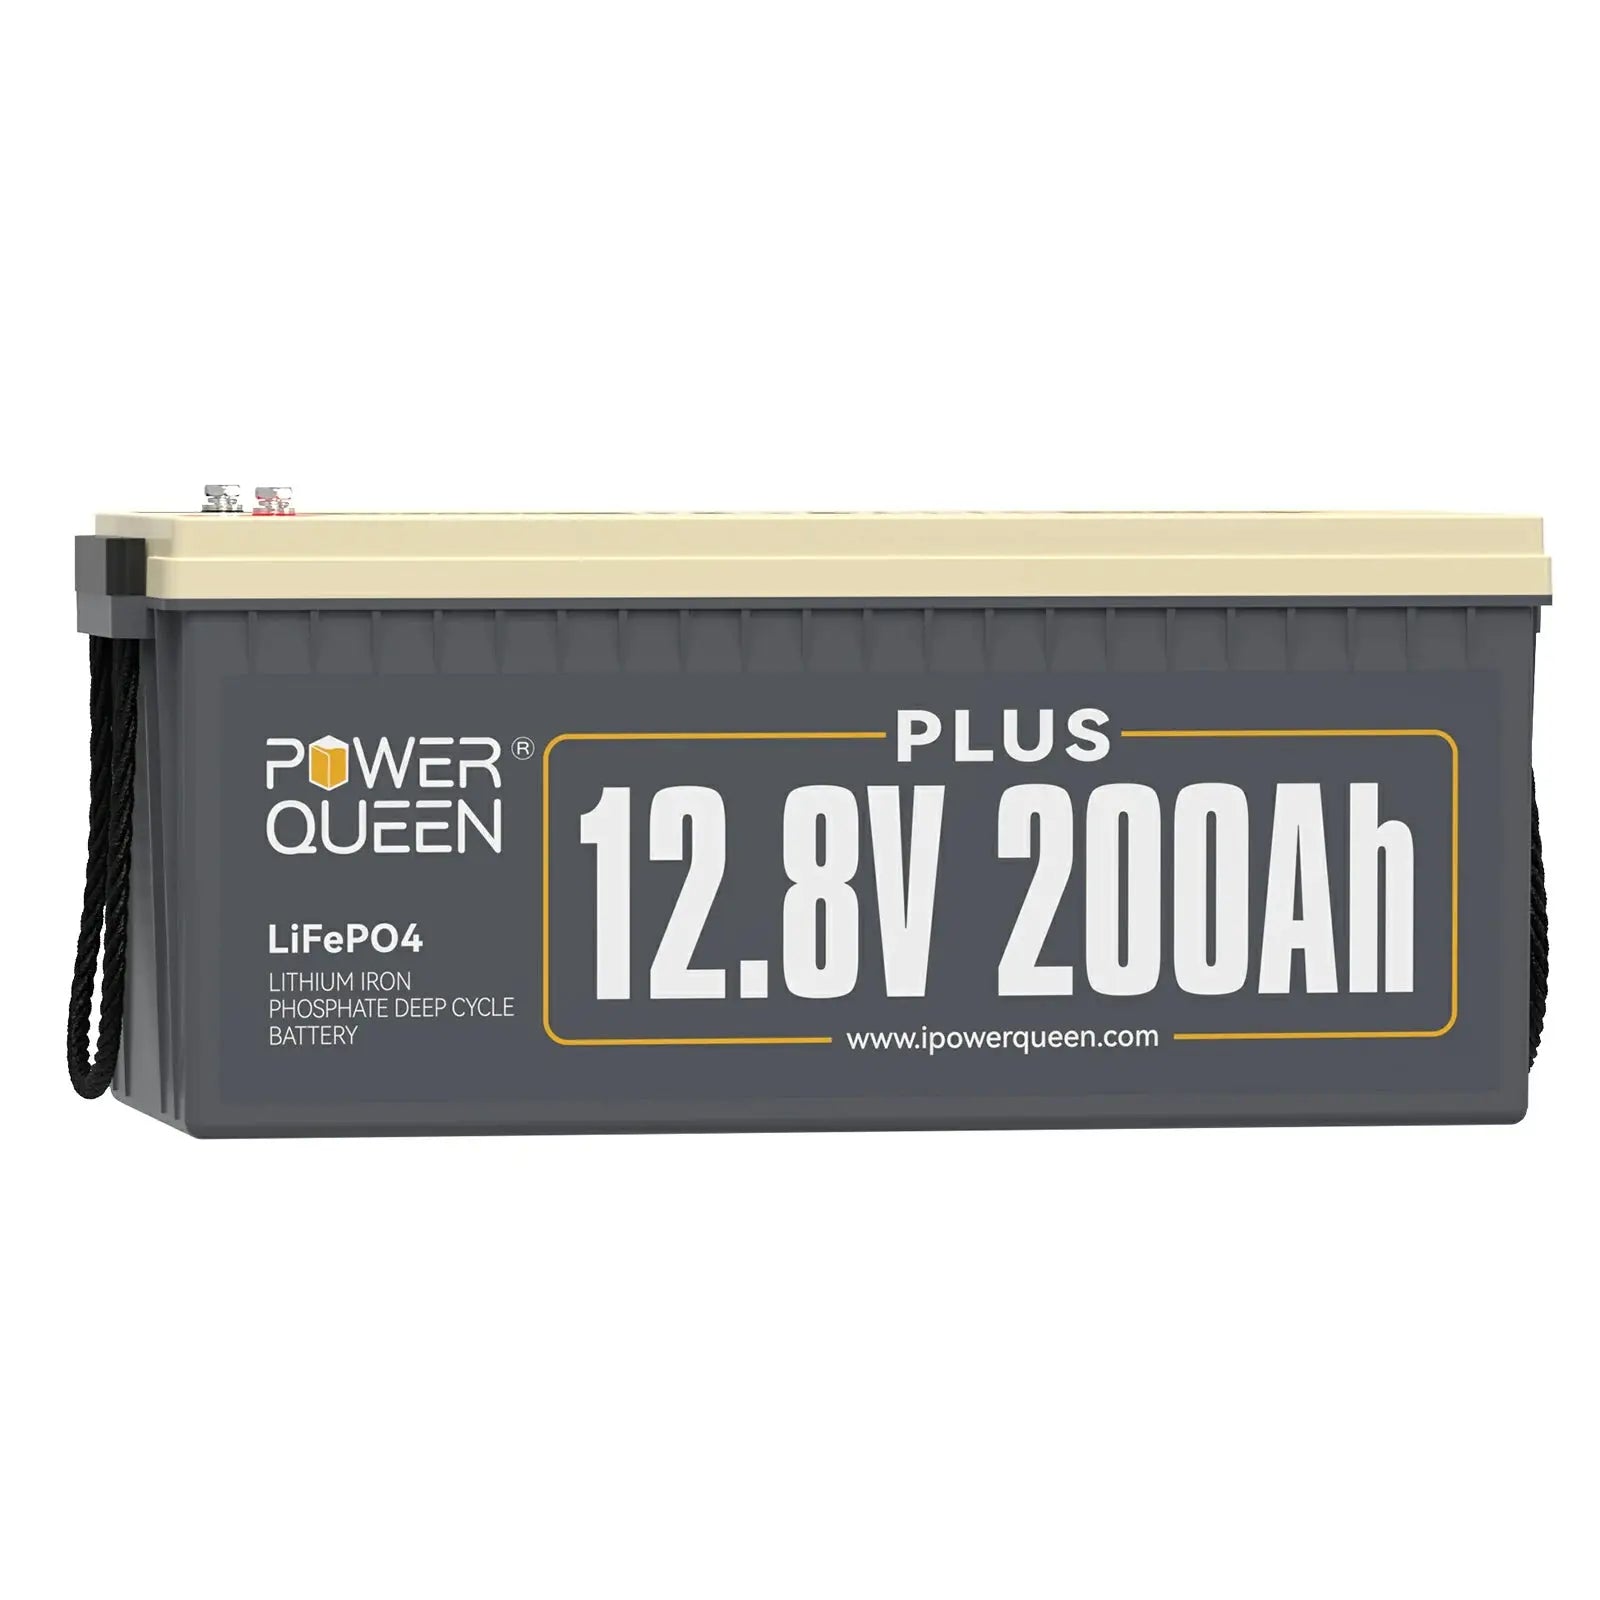 【Like New】Power Queen 12V 200Ah PLUS LiFePO4 Battery, Built-in 200A BMS Power Queen